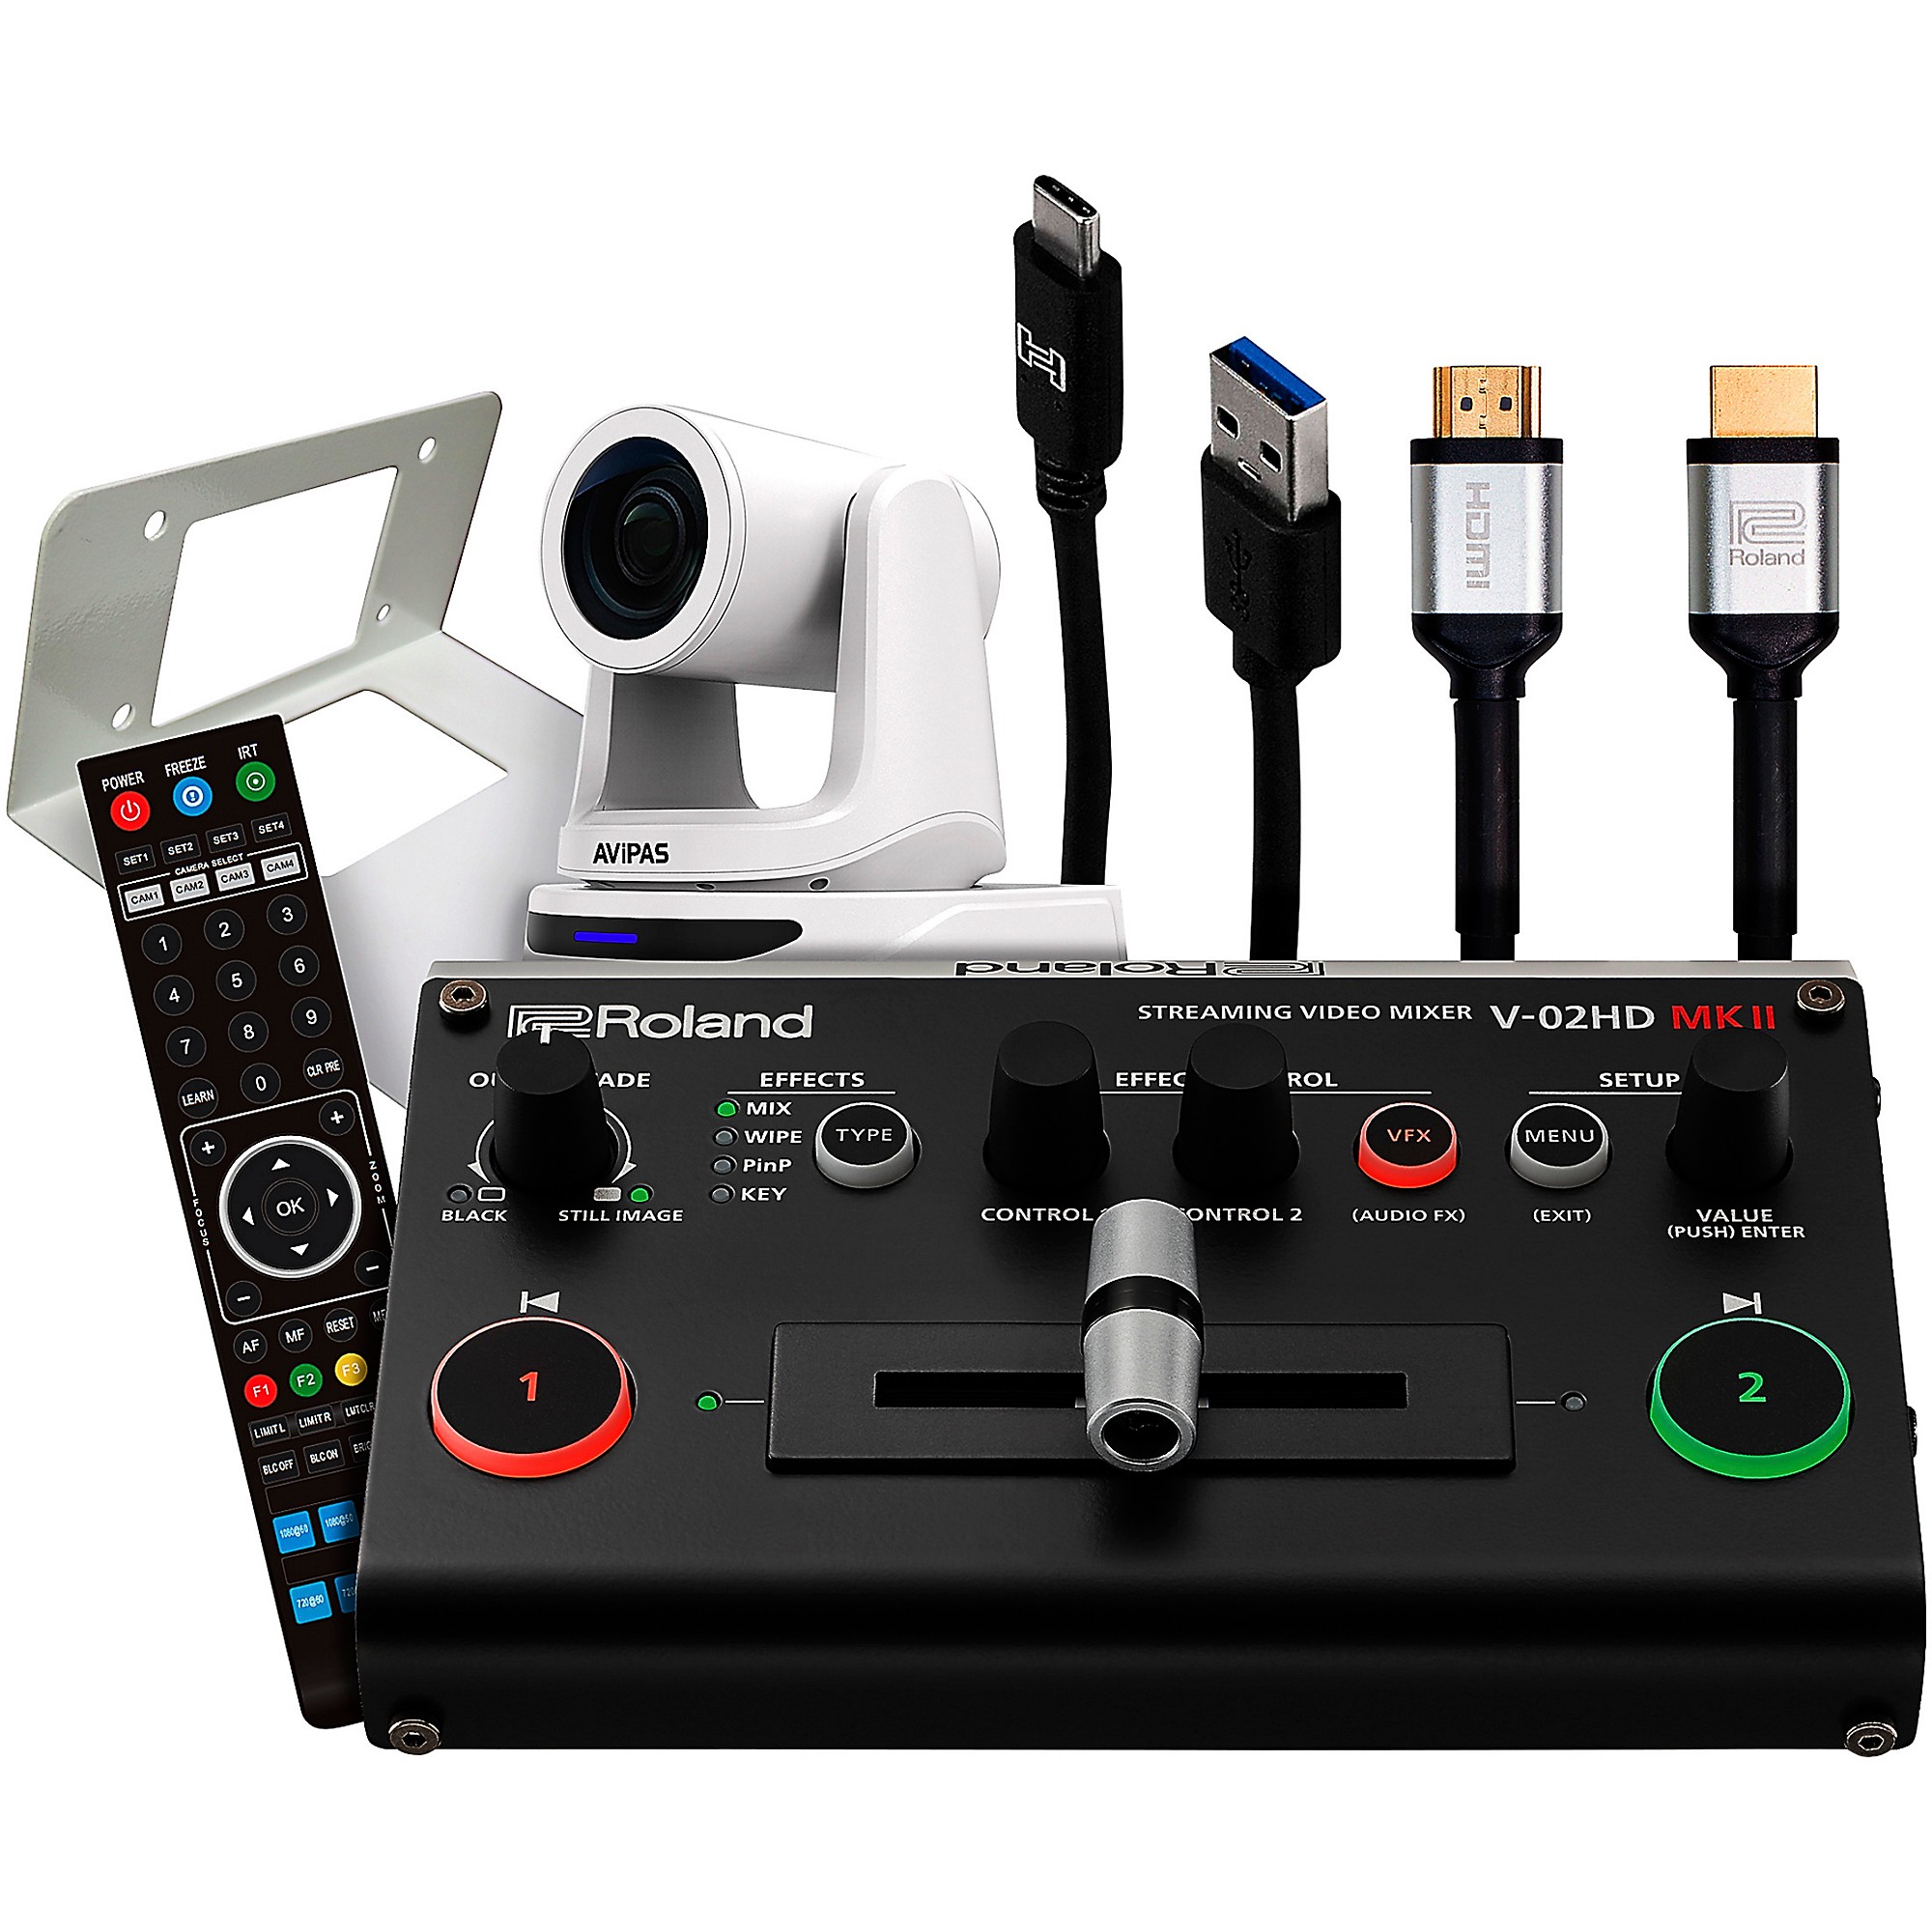 Streaming system